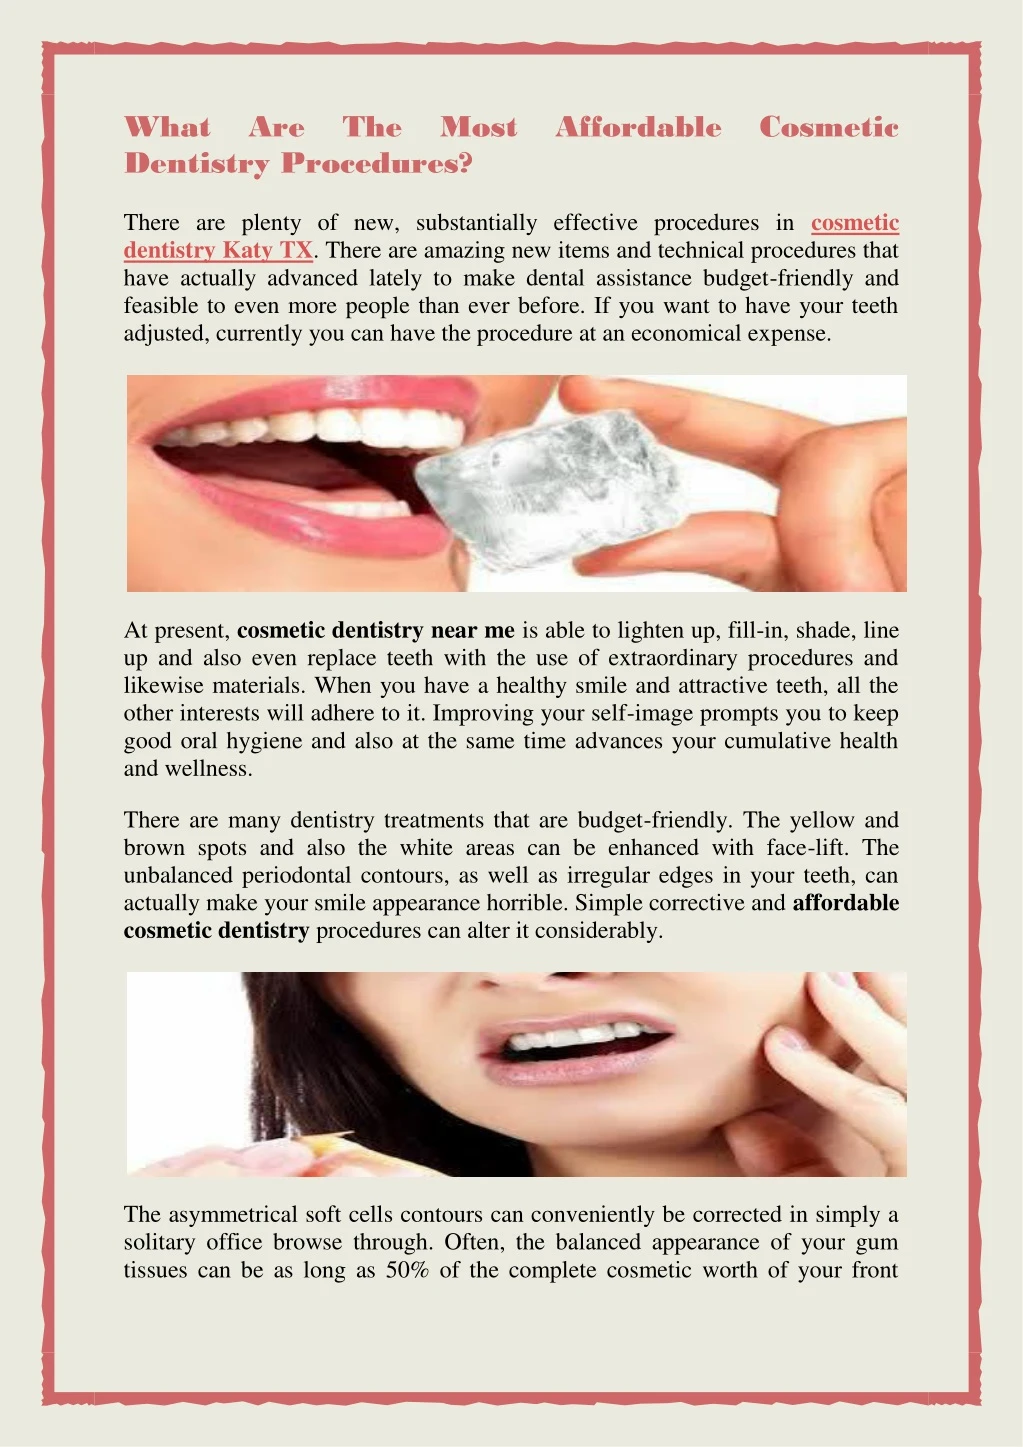 what are the most affordable cosmetic dentistry